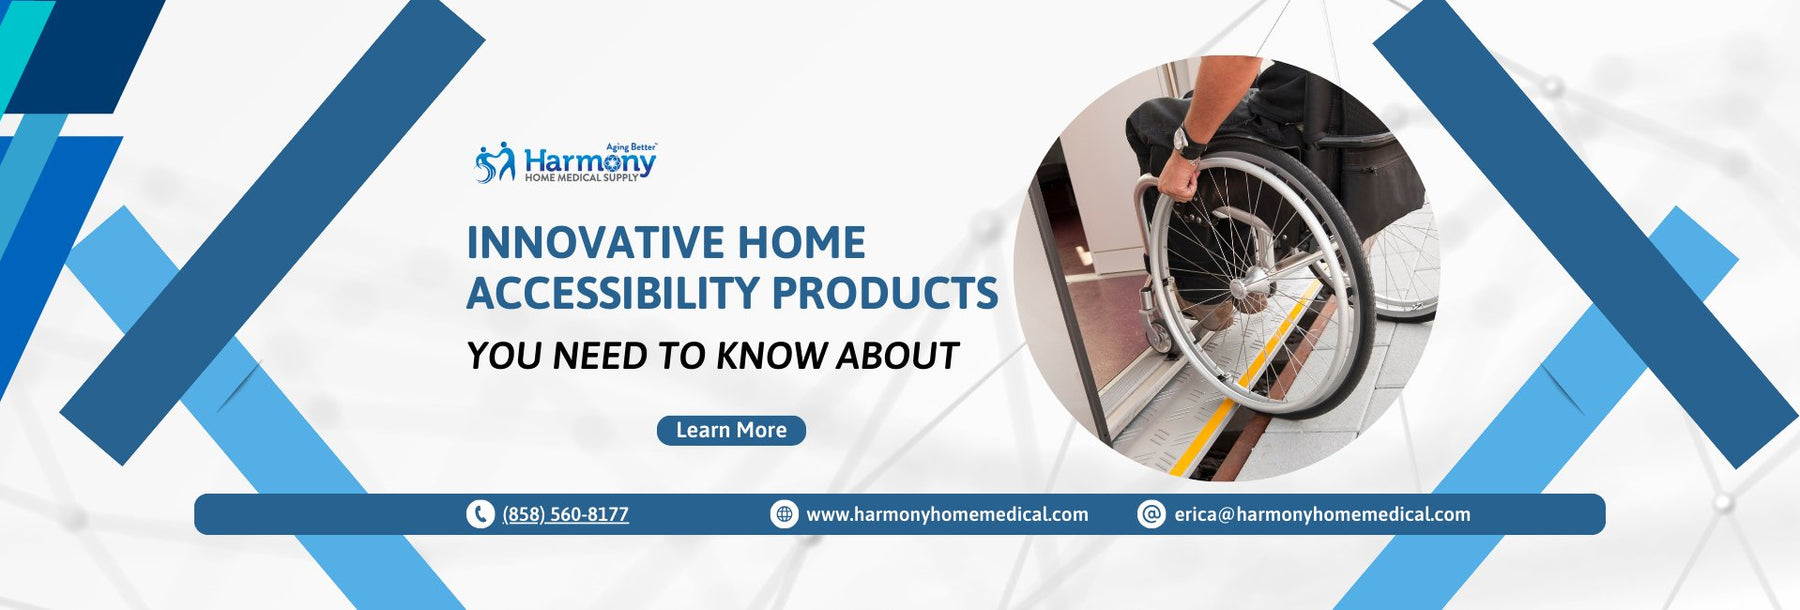 Innovative Home Accessibility Products You Need to Know About - Harmony Home Medical Supply